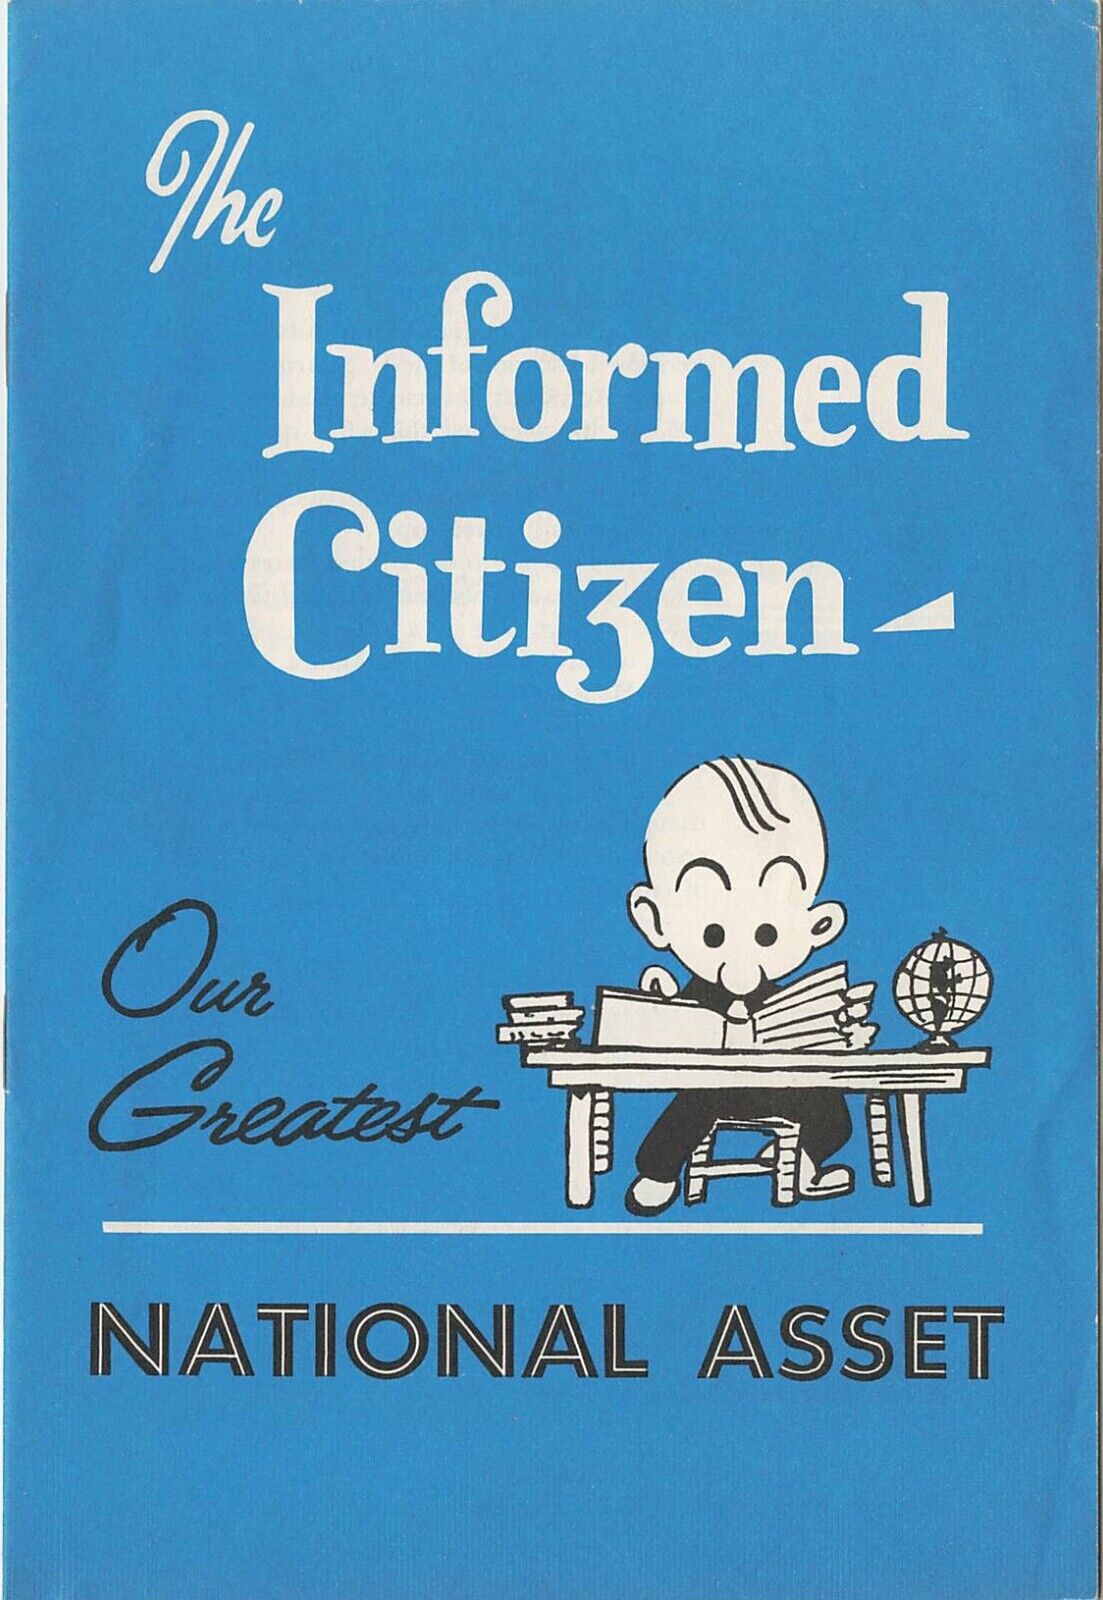 1950s Sandia Corp Booklet The Informed Citizen Out Greatest National Asset